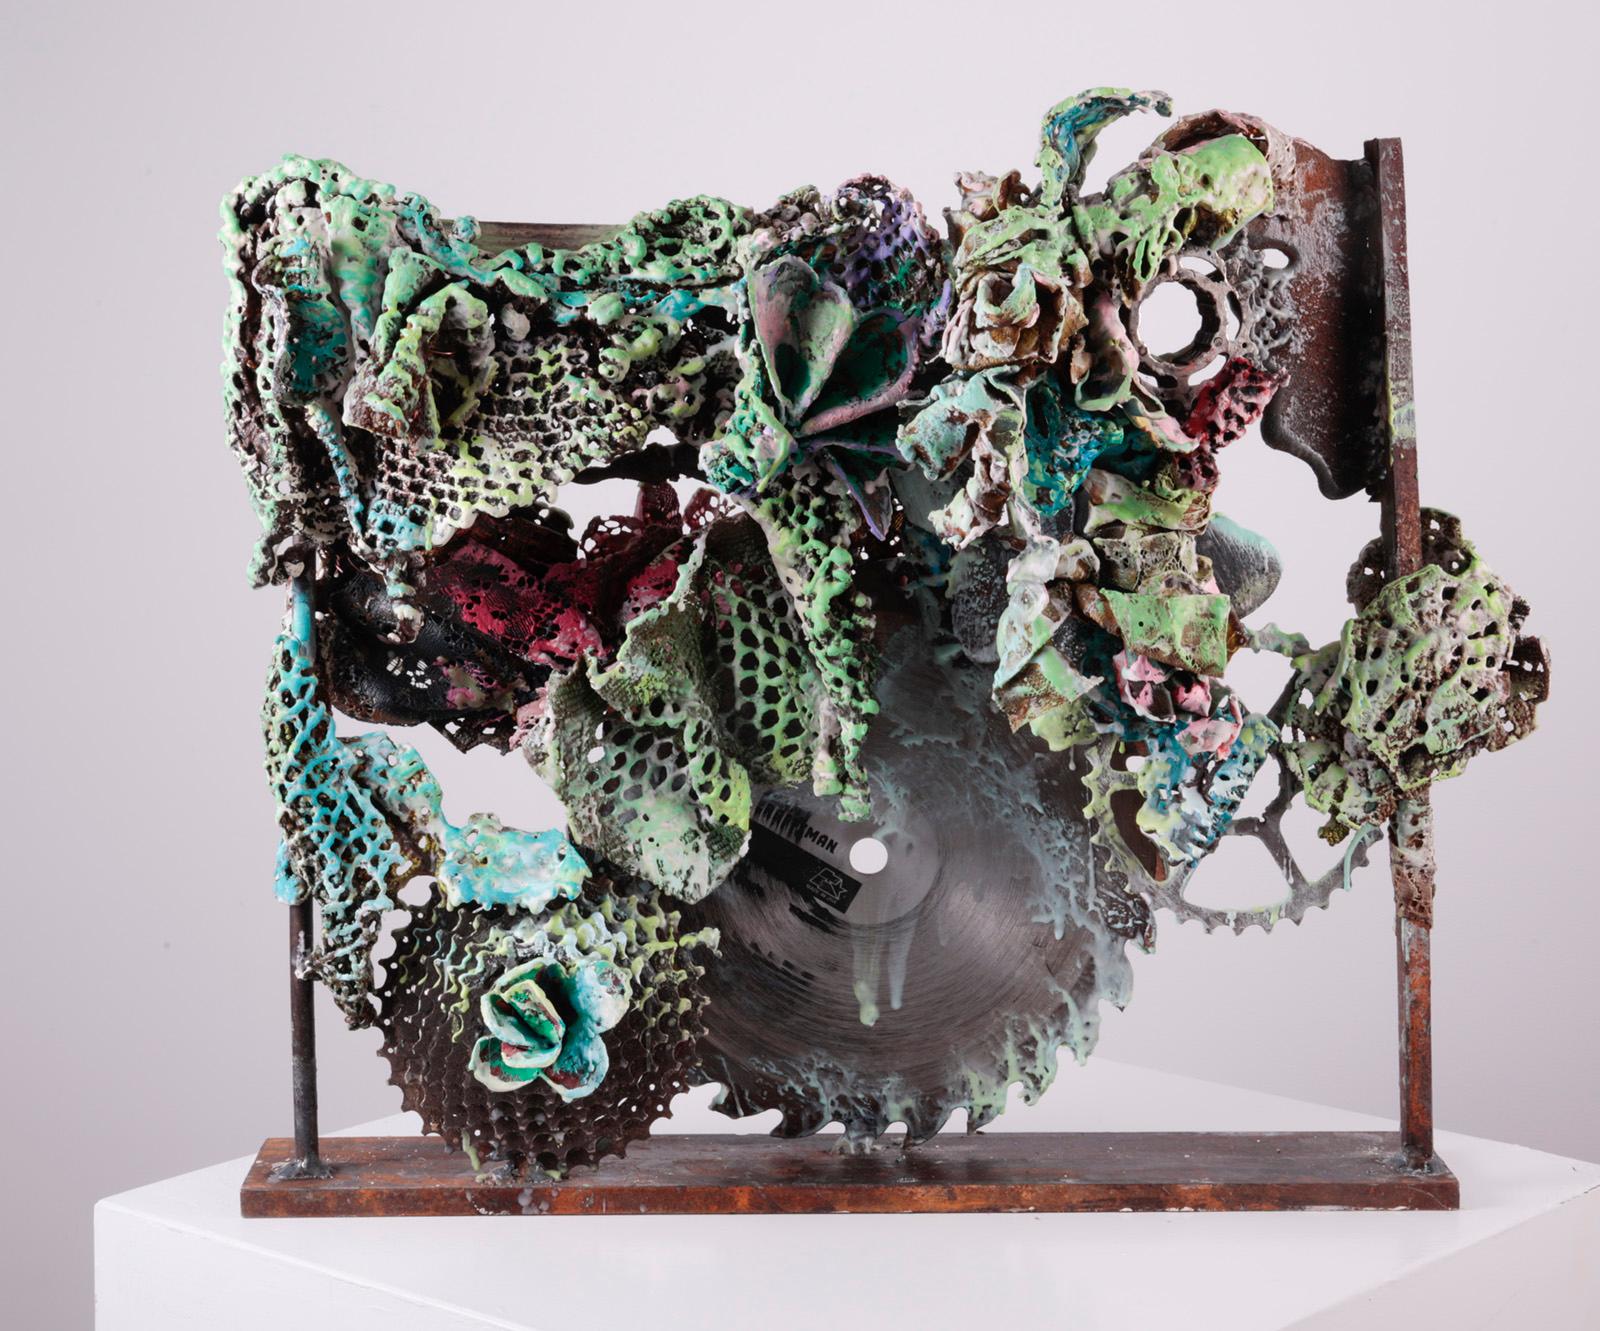 Rebecca Darlington Abstract Sculpture - "Make Earth Cool Again", turquoise green overlays copper mesh architecture